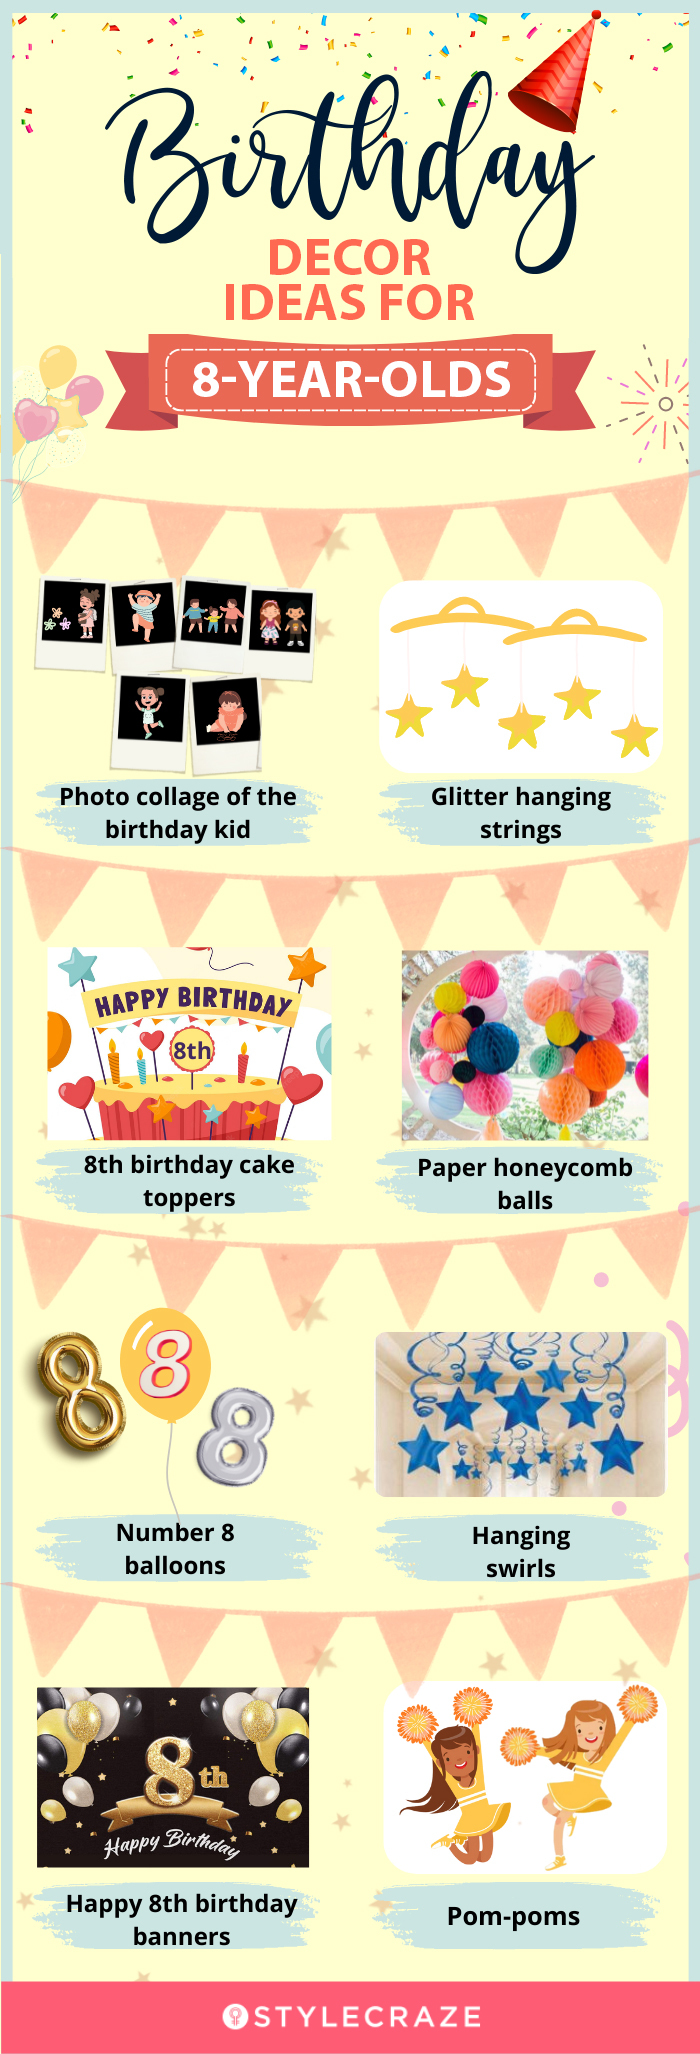 birthday decor ideas for 8 year olds (infographic)